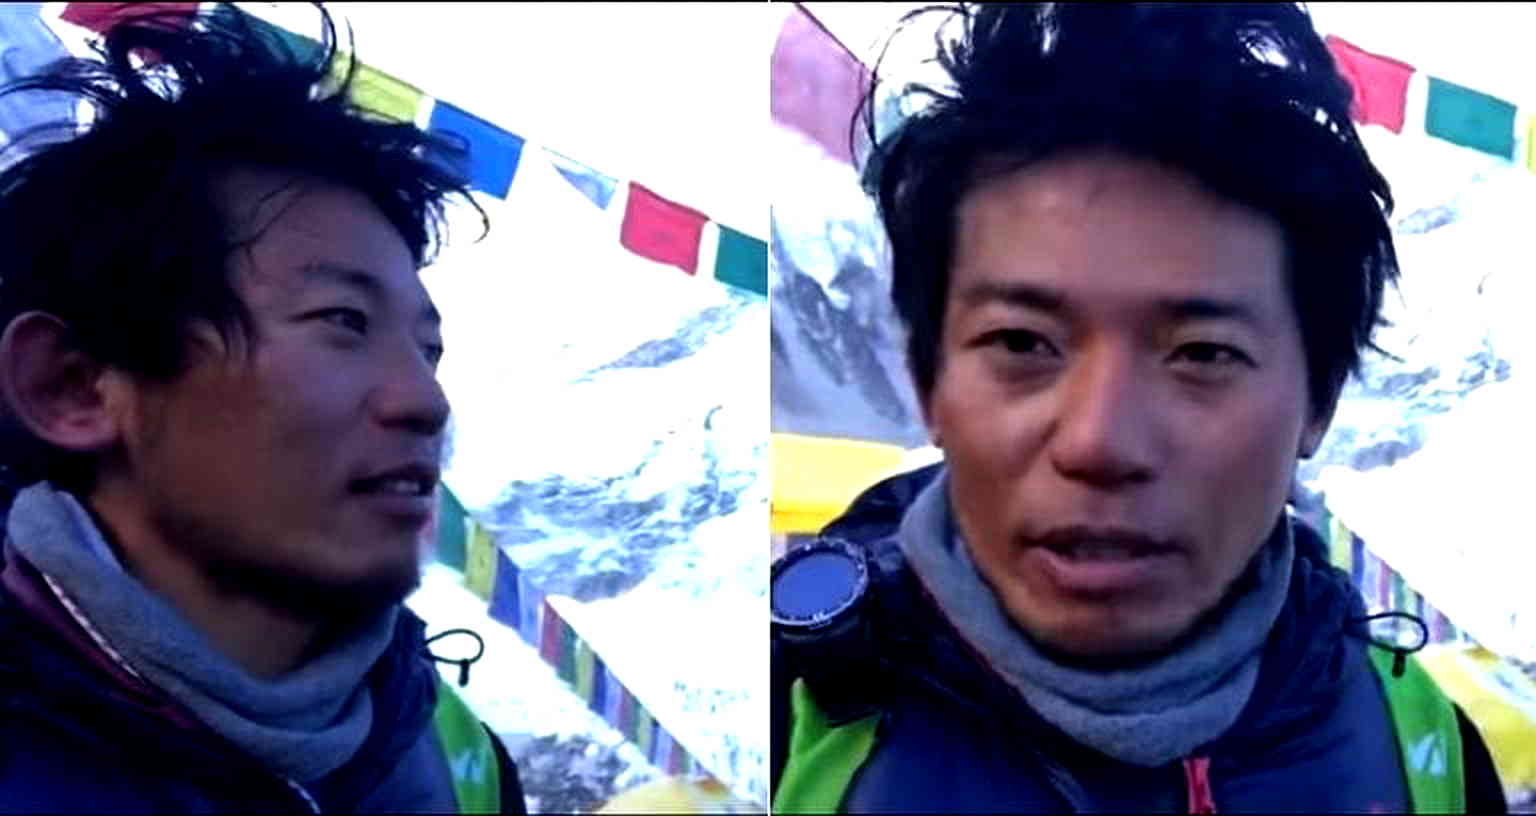 Japanese Climber Dies During 8th Attempt to Reach Top of Mount Everest